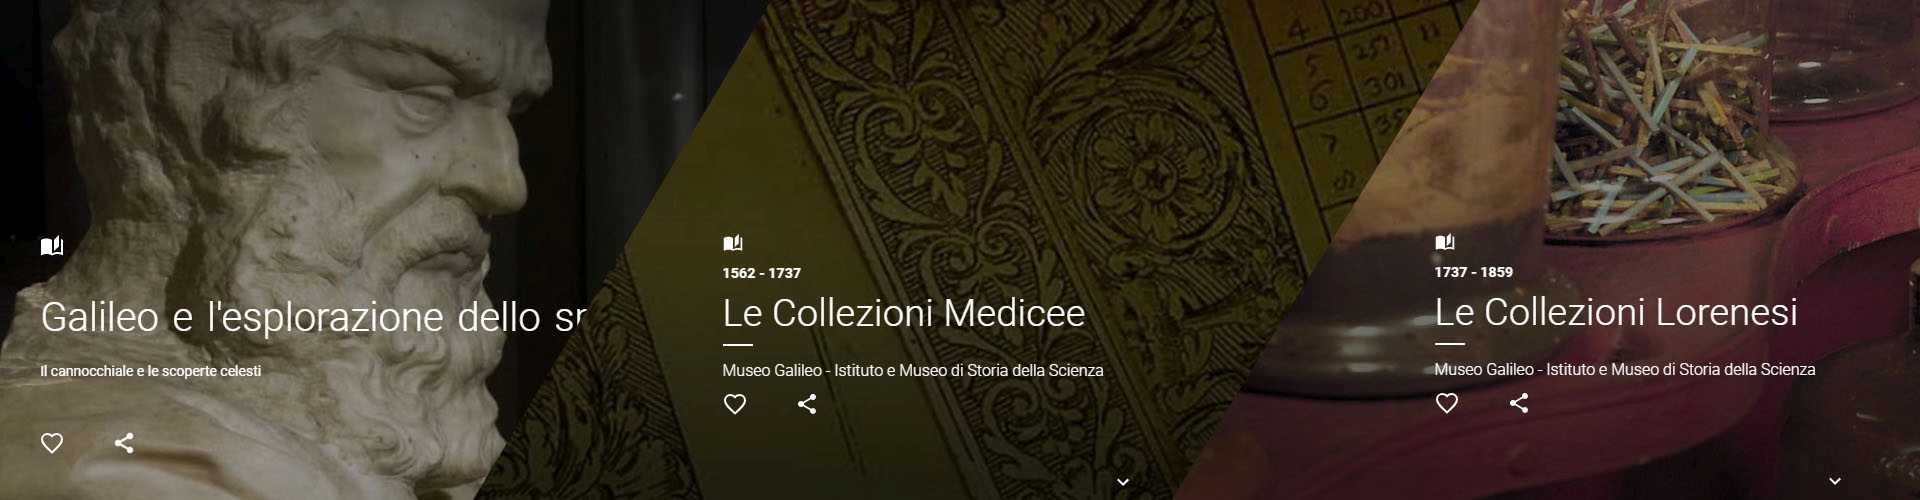 The Museo Galileo on the Google Cultural Institute